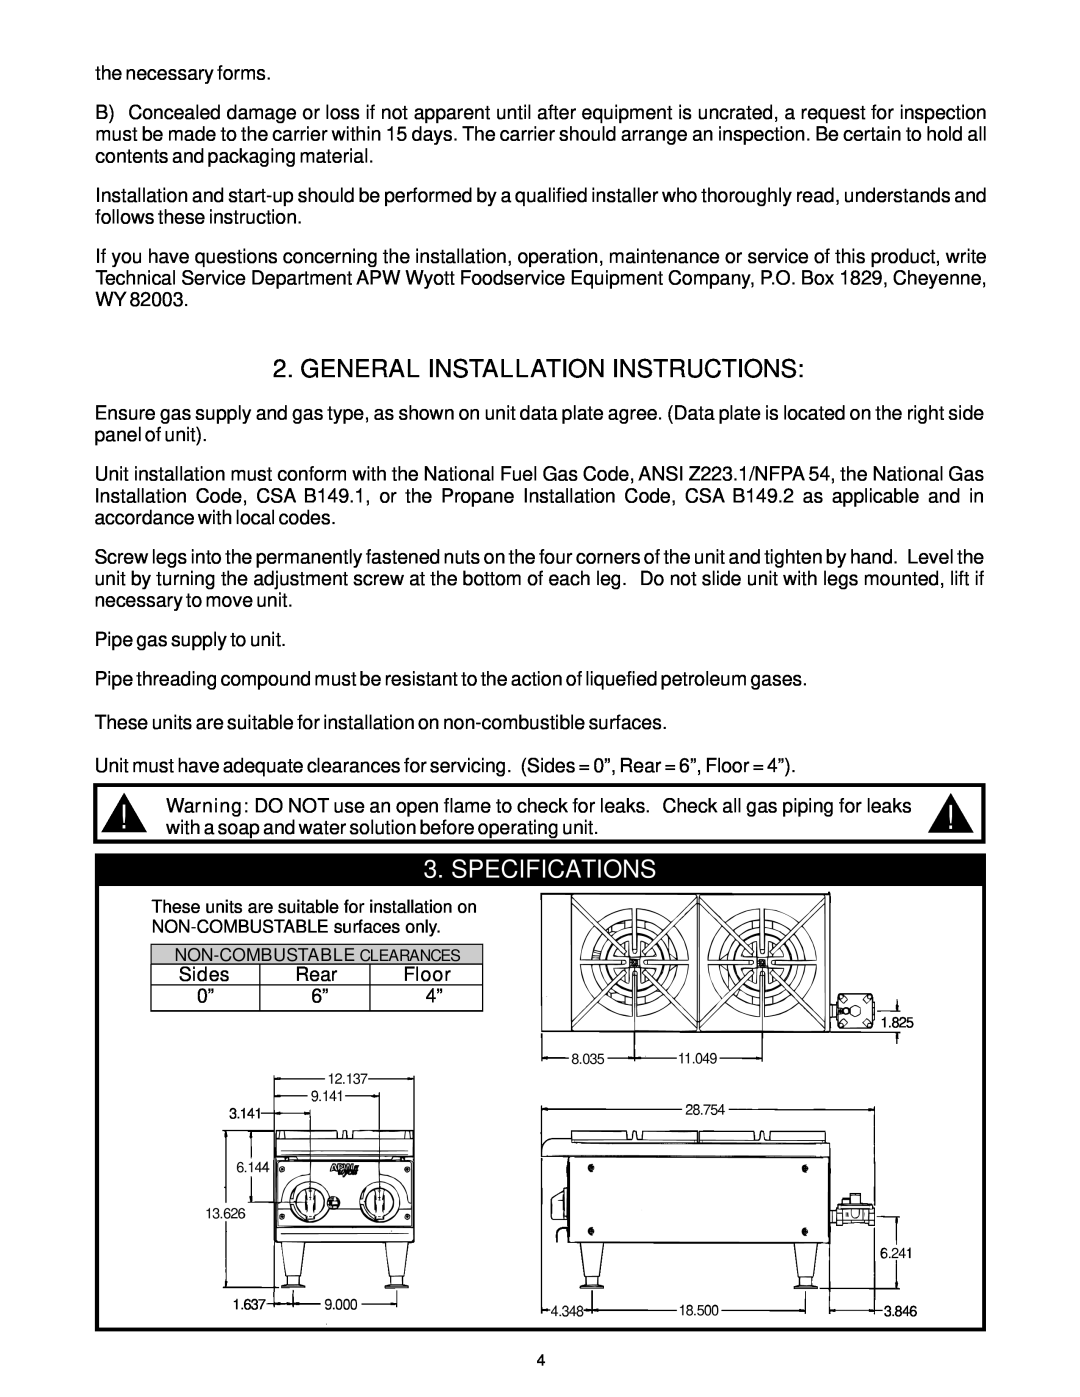 APW Wyott GHP-2H operating instructions General Installation Instructions, Specifications, Floor 